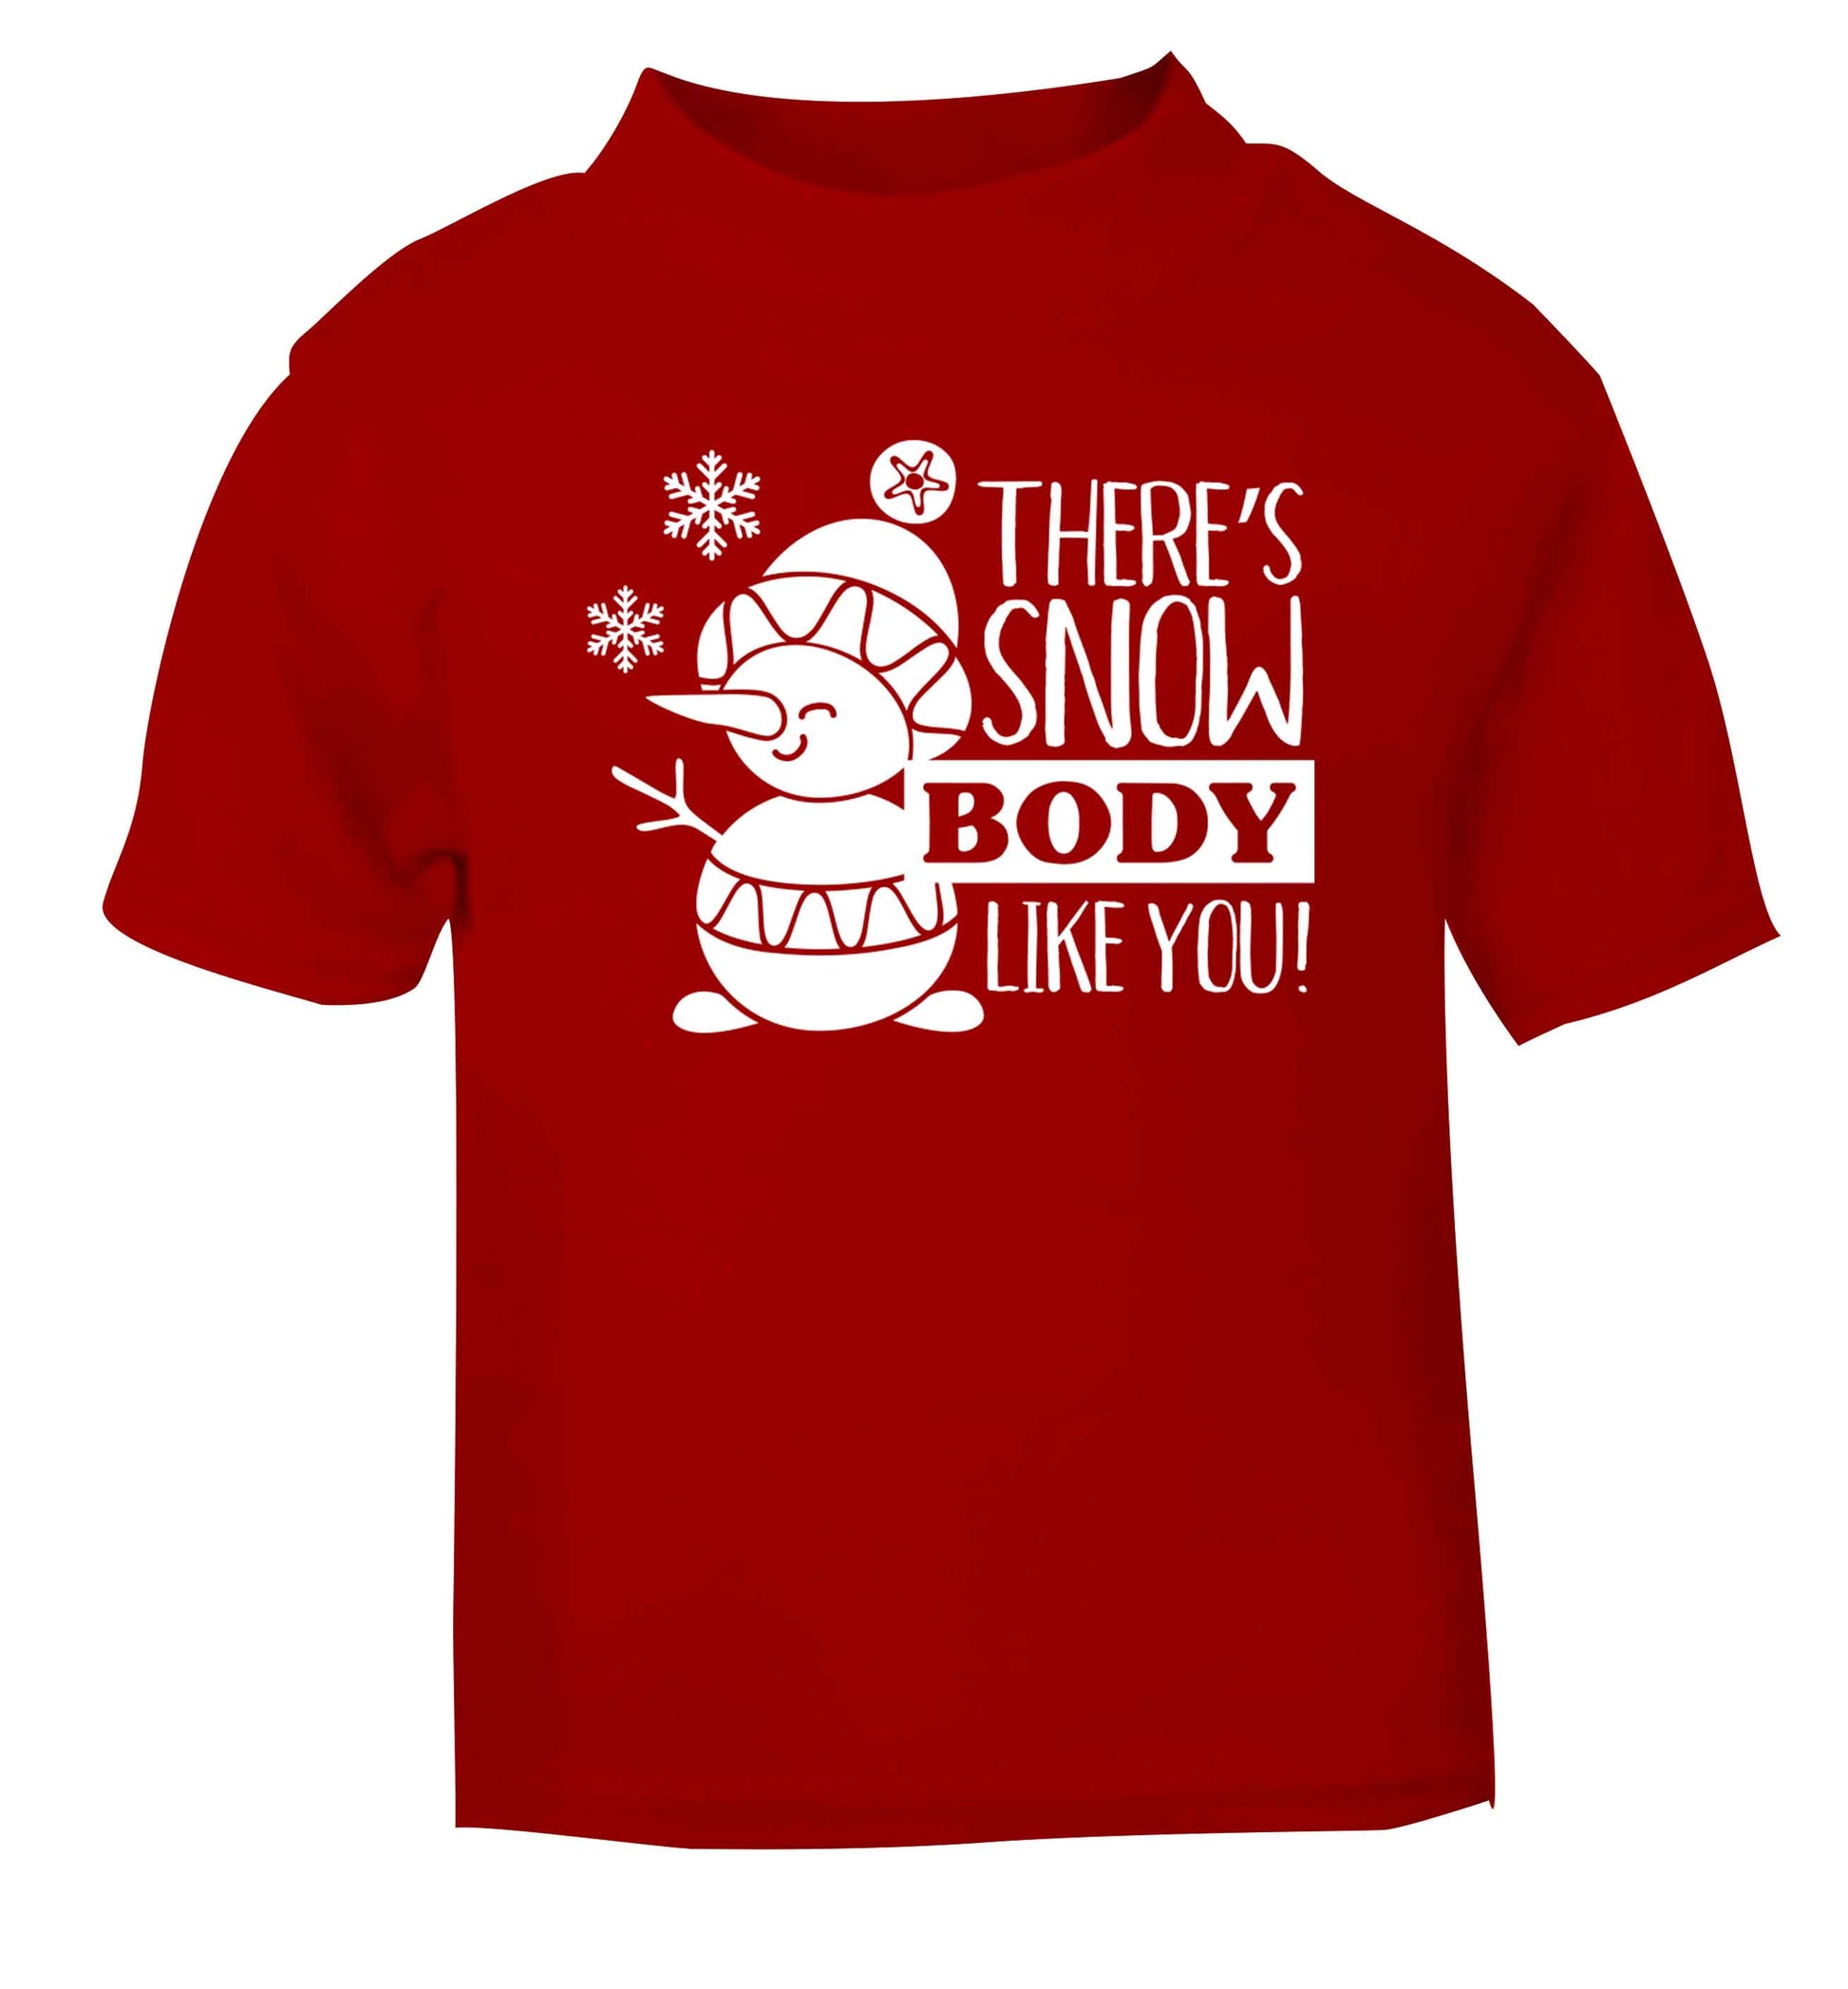 There's snow body like you red baby toddler Tshirt 2 Years